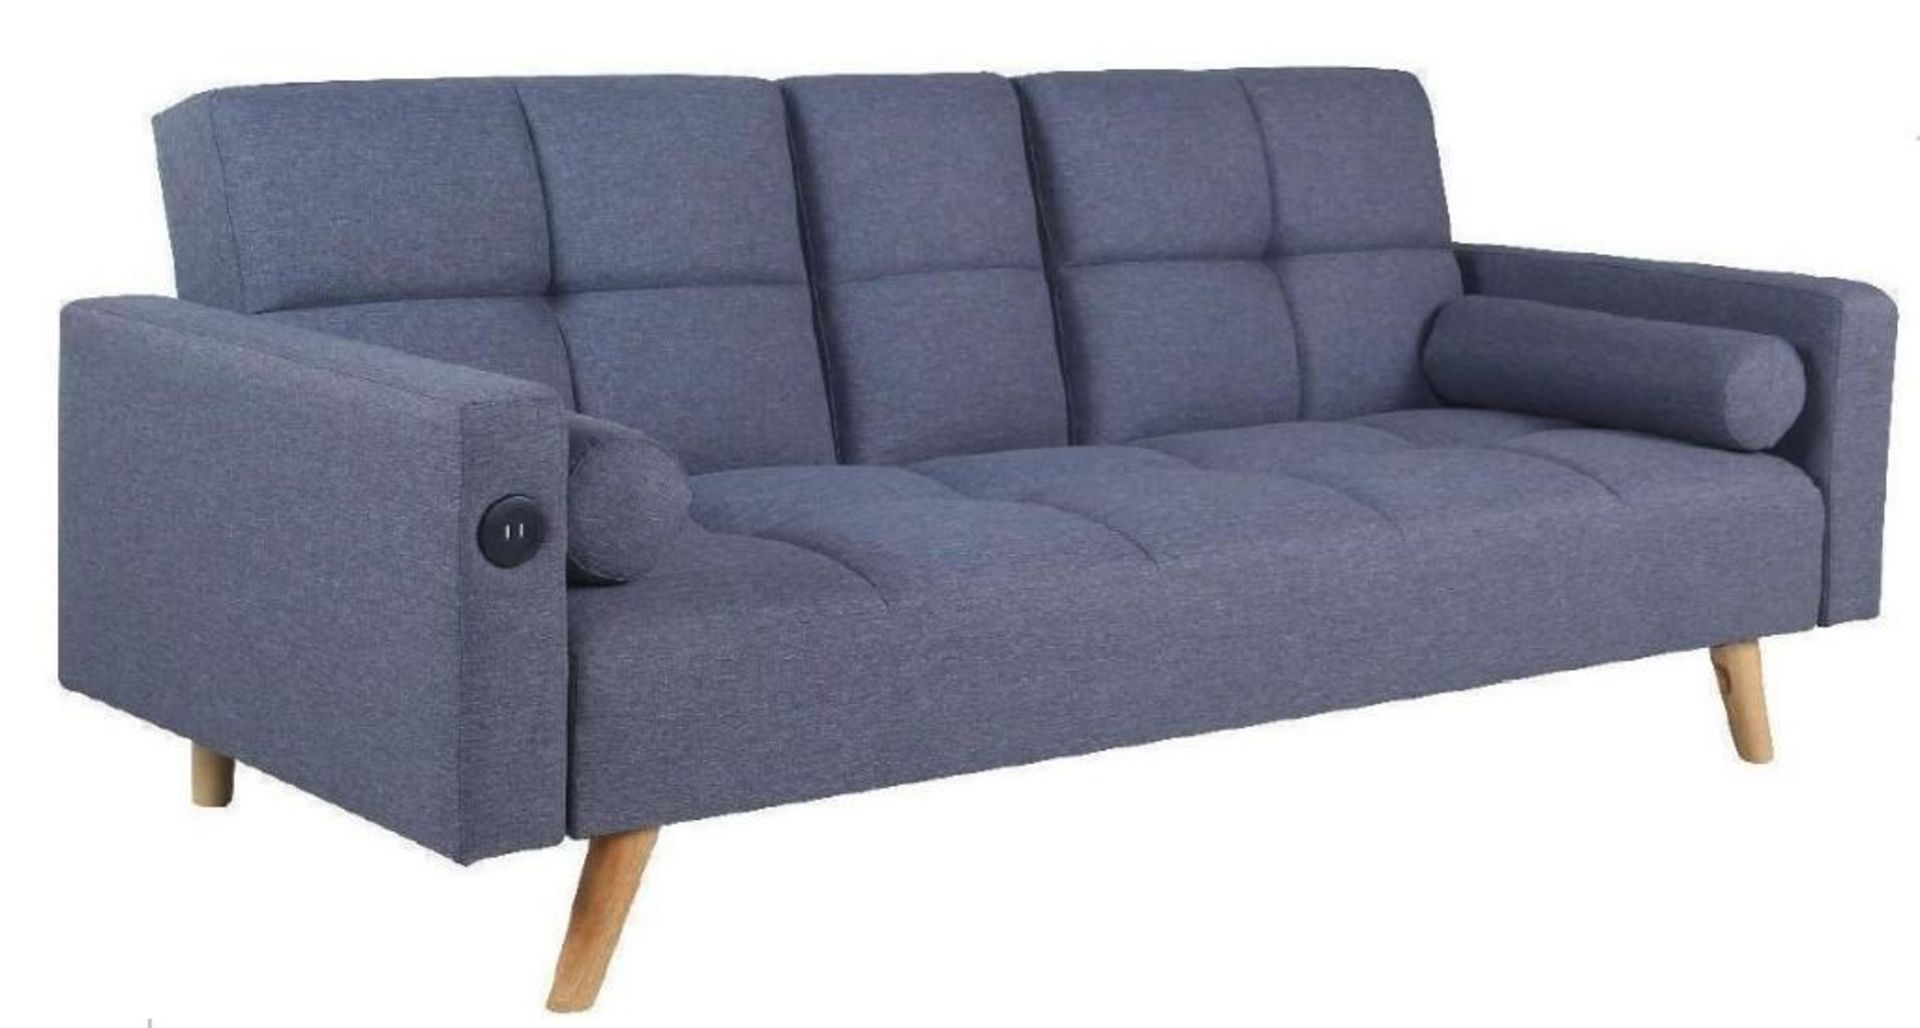 Brand new Boxed 2 Seater Clic Clac USB Sofa Bed